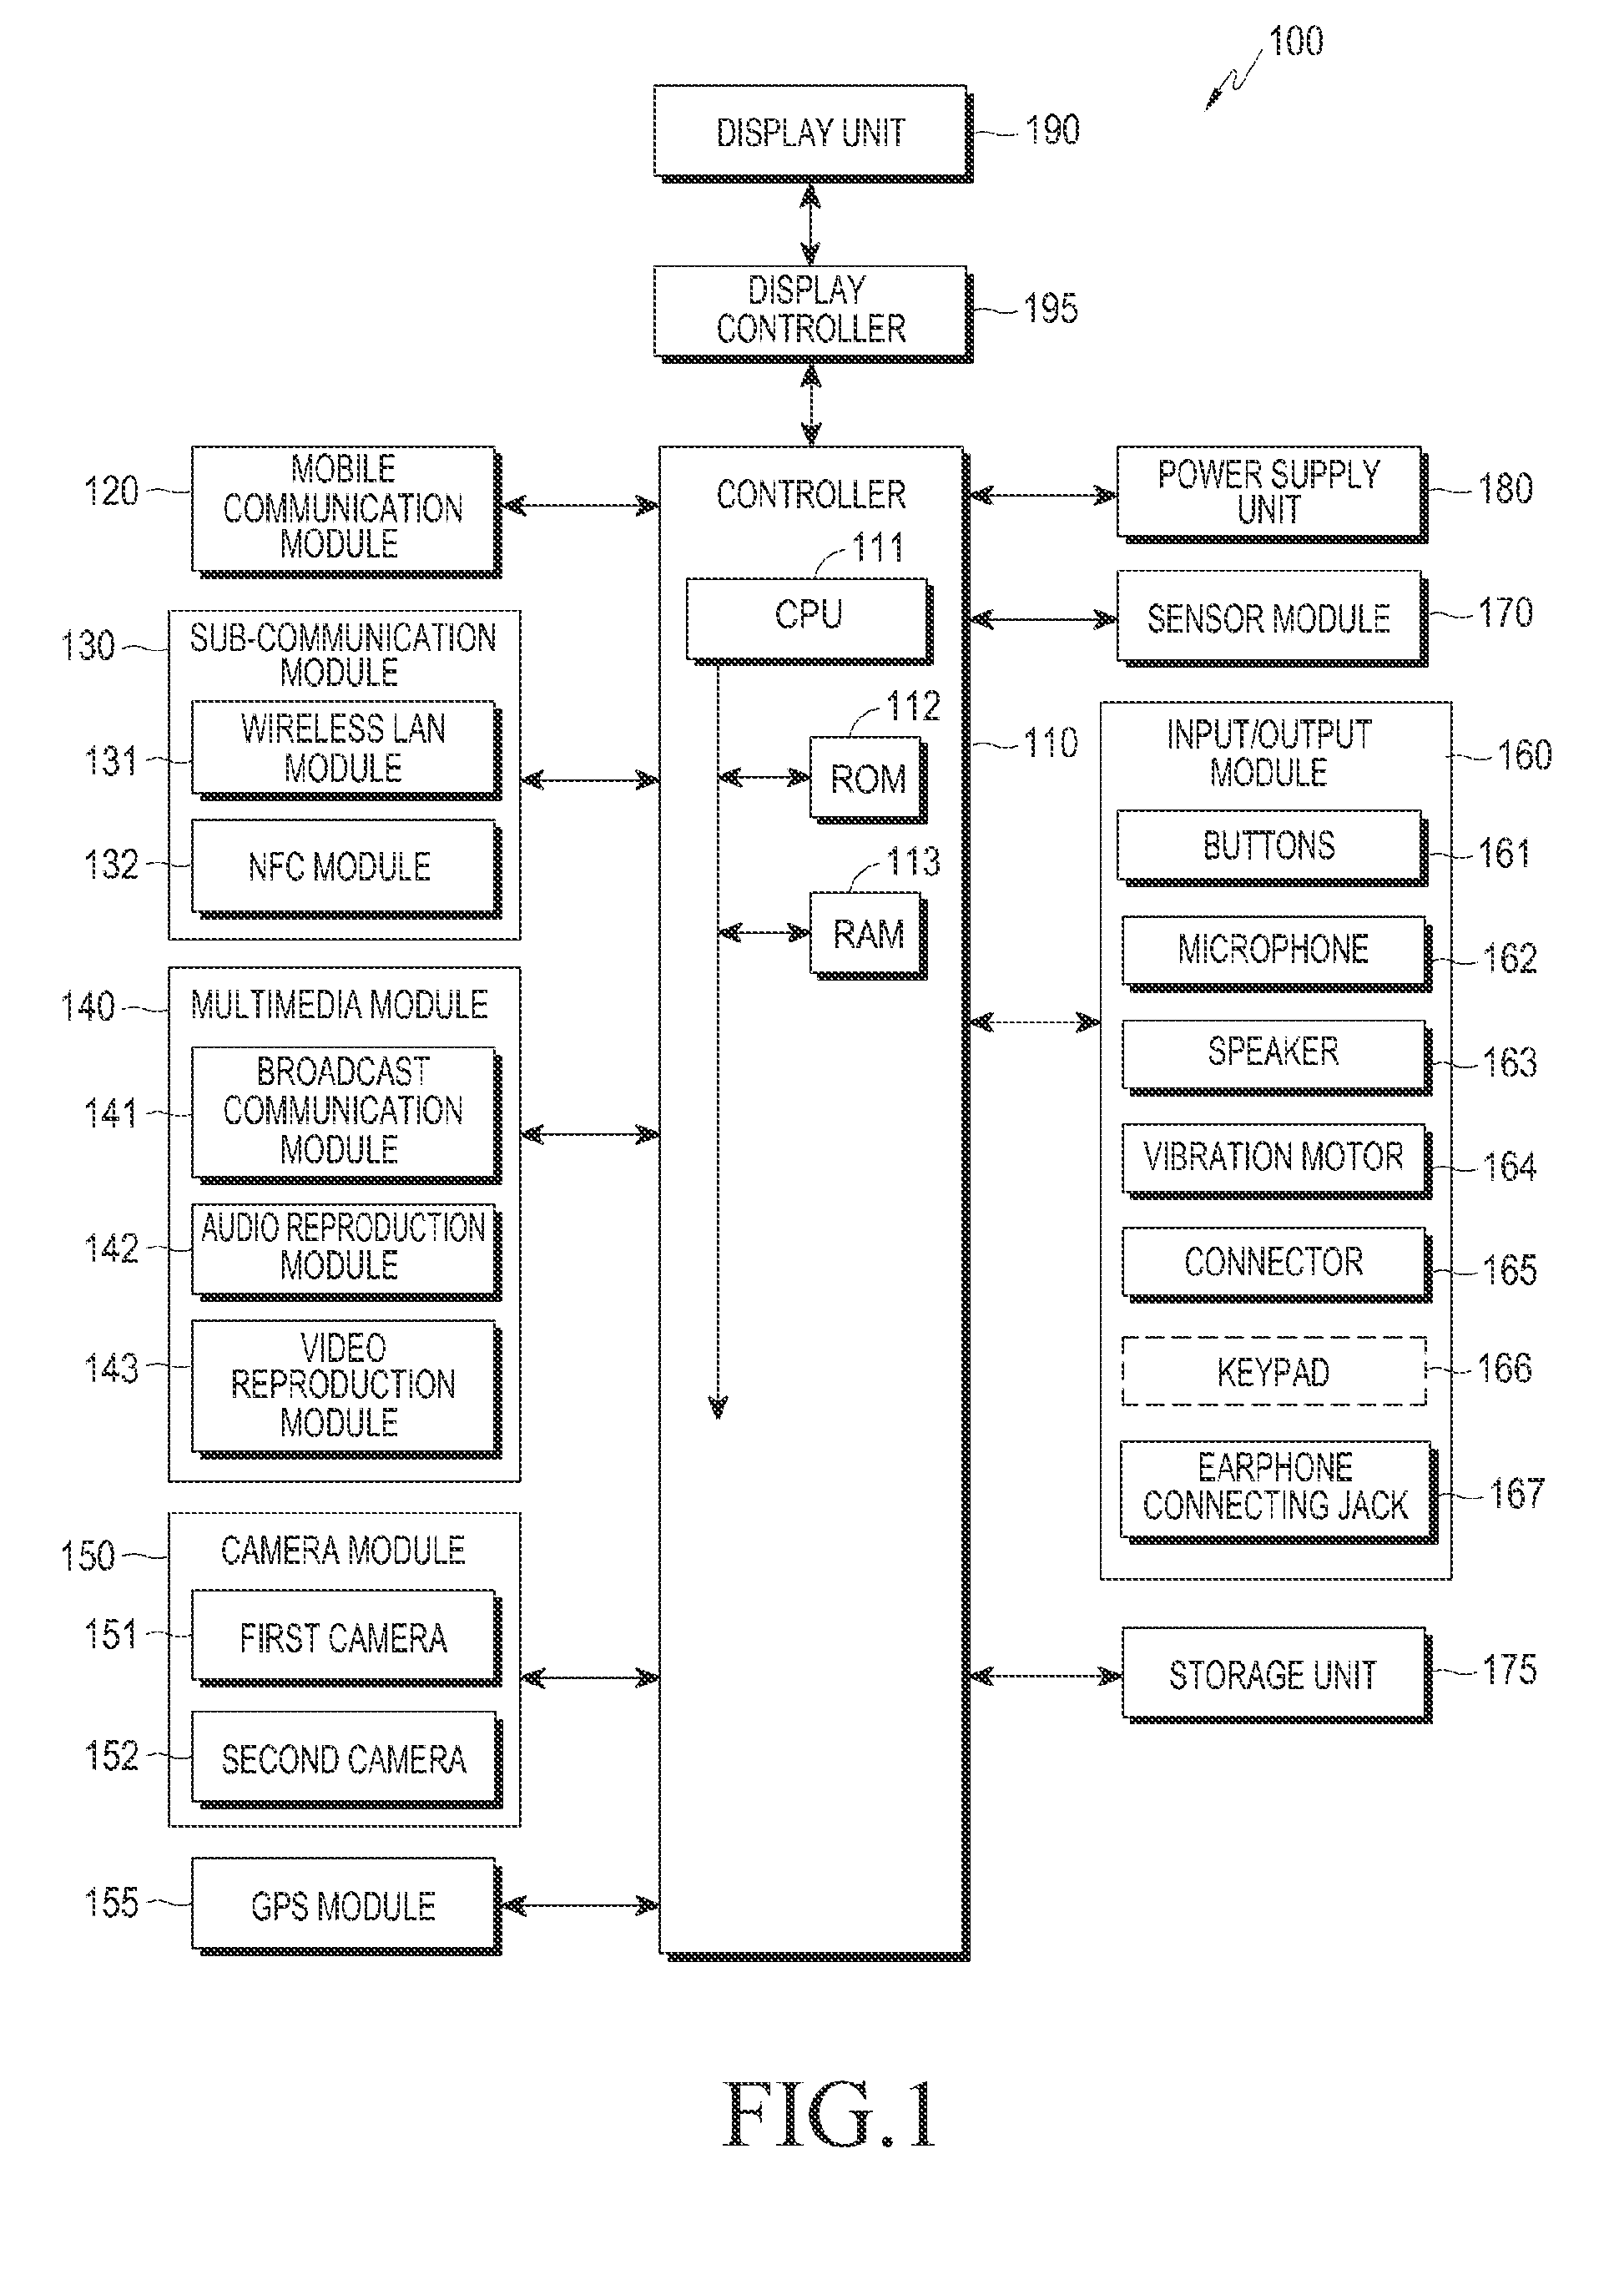 Home screen sharing apparatus and method thereof